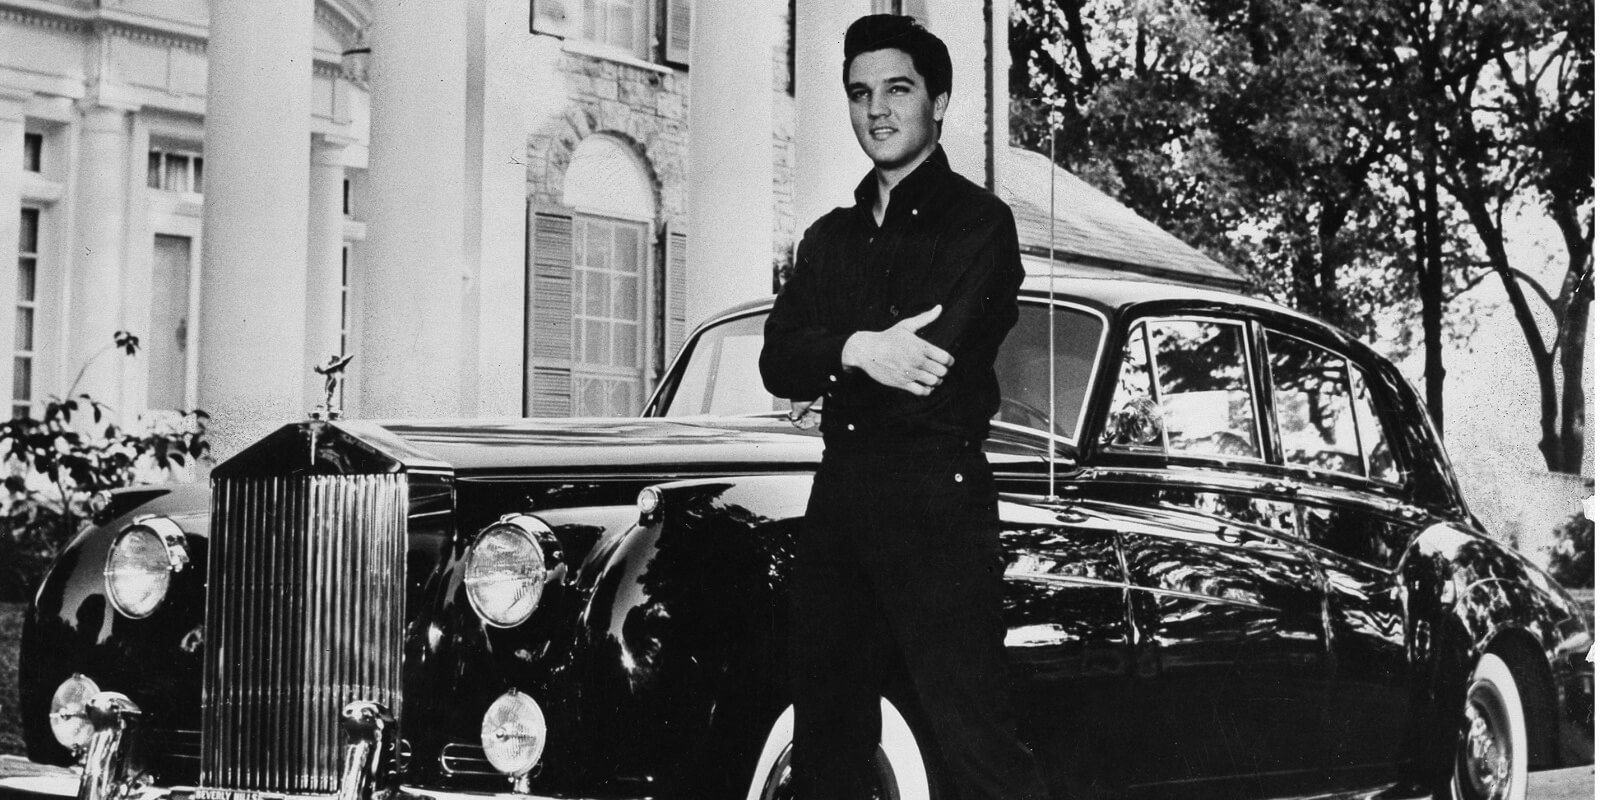 Elvis Presley photographed with one of his cars in front of his Graceland home in Memphis, TN.